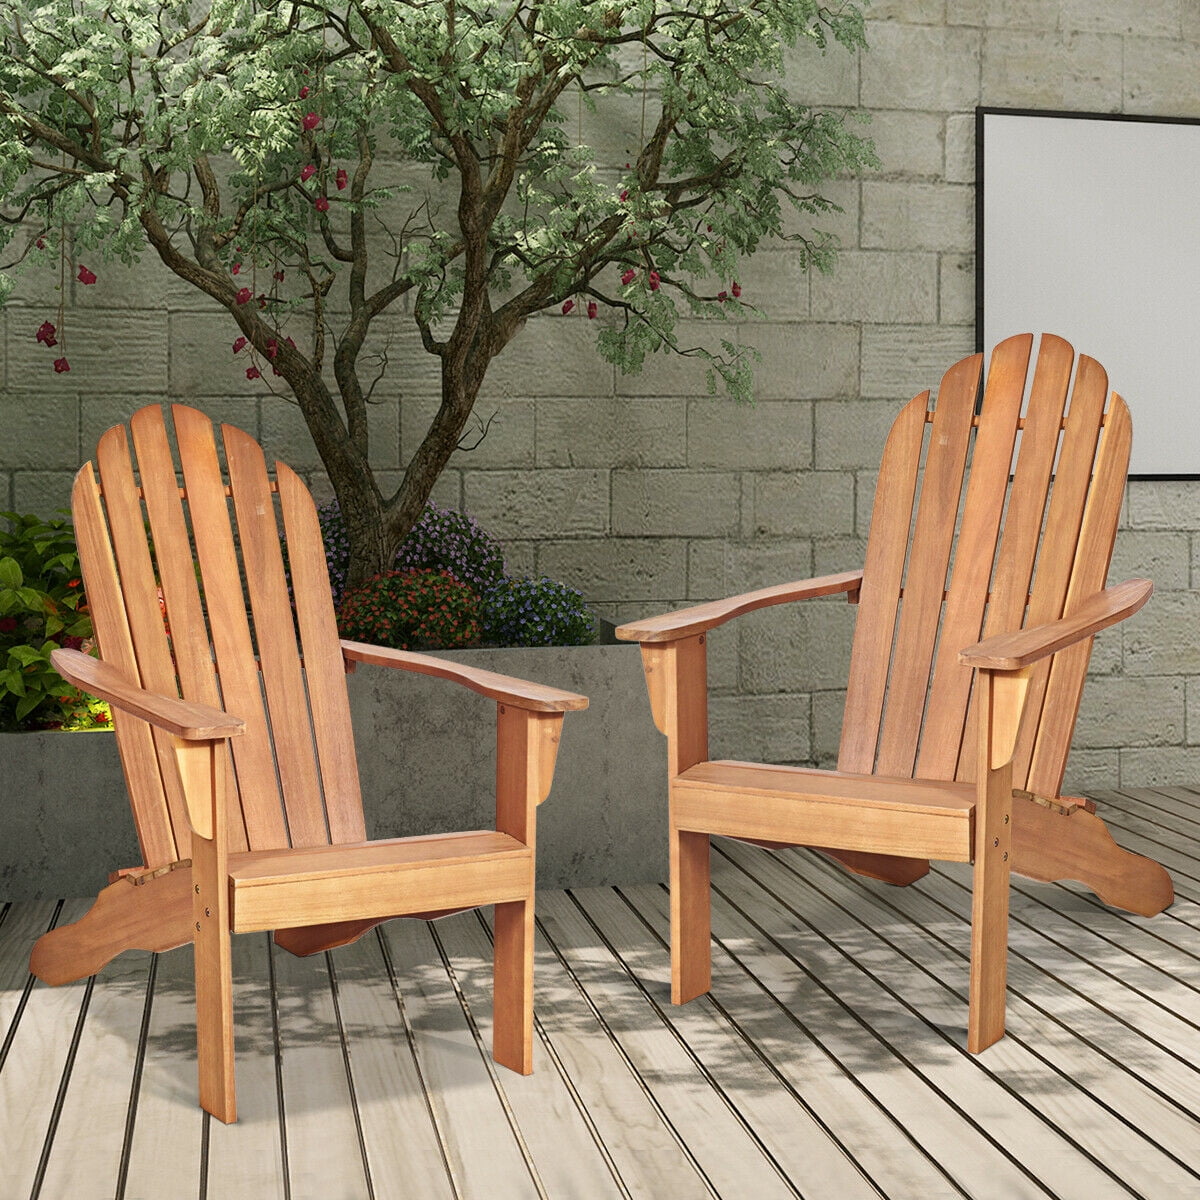 Gymax 2PCS Wooden Classic Adirondack Chair Lounge Chair Outdoor Patio ...